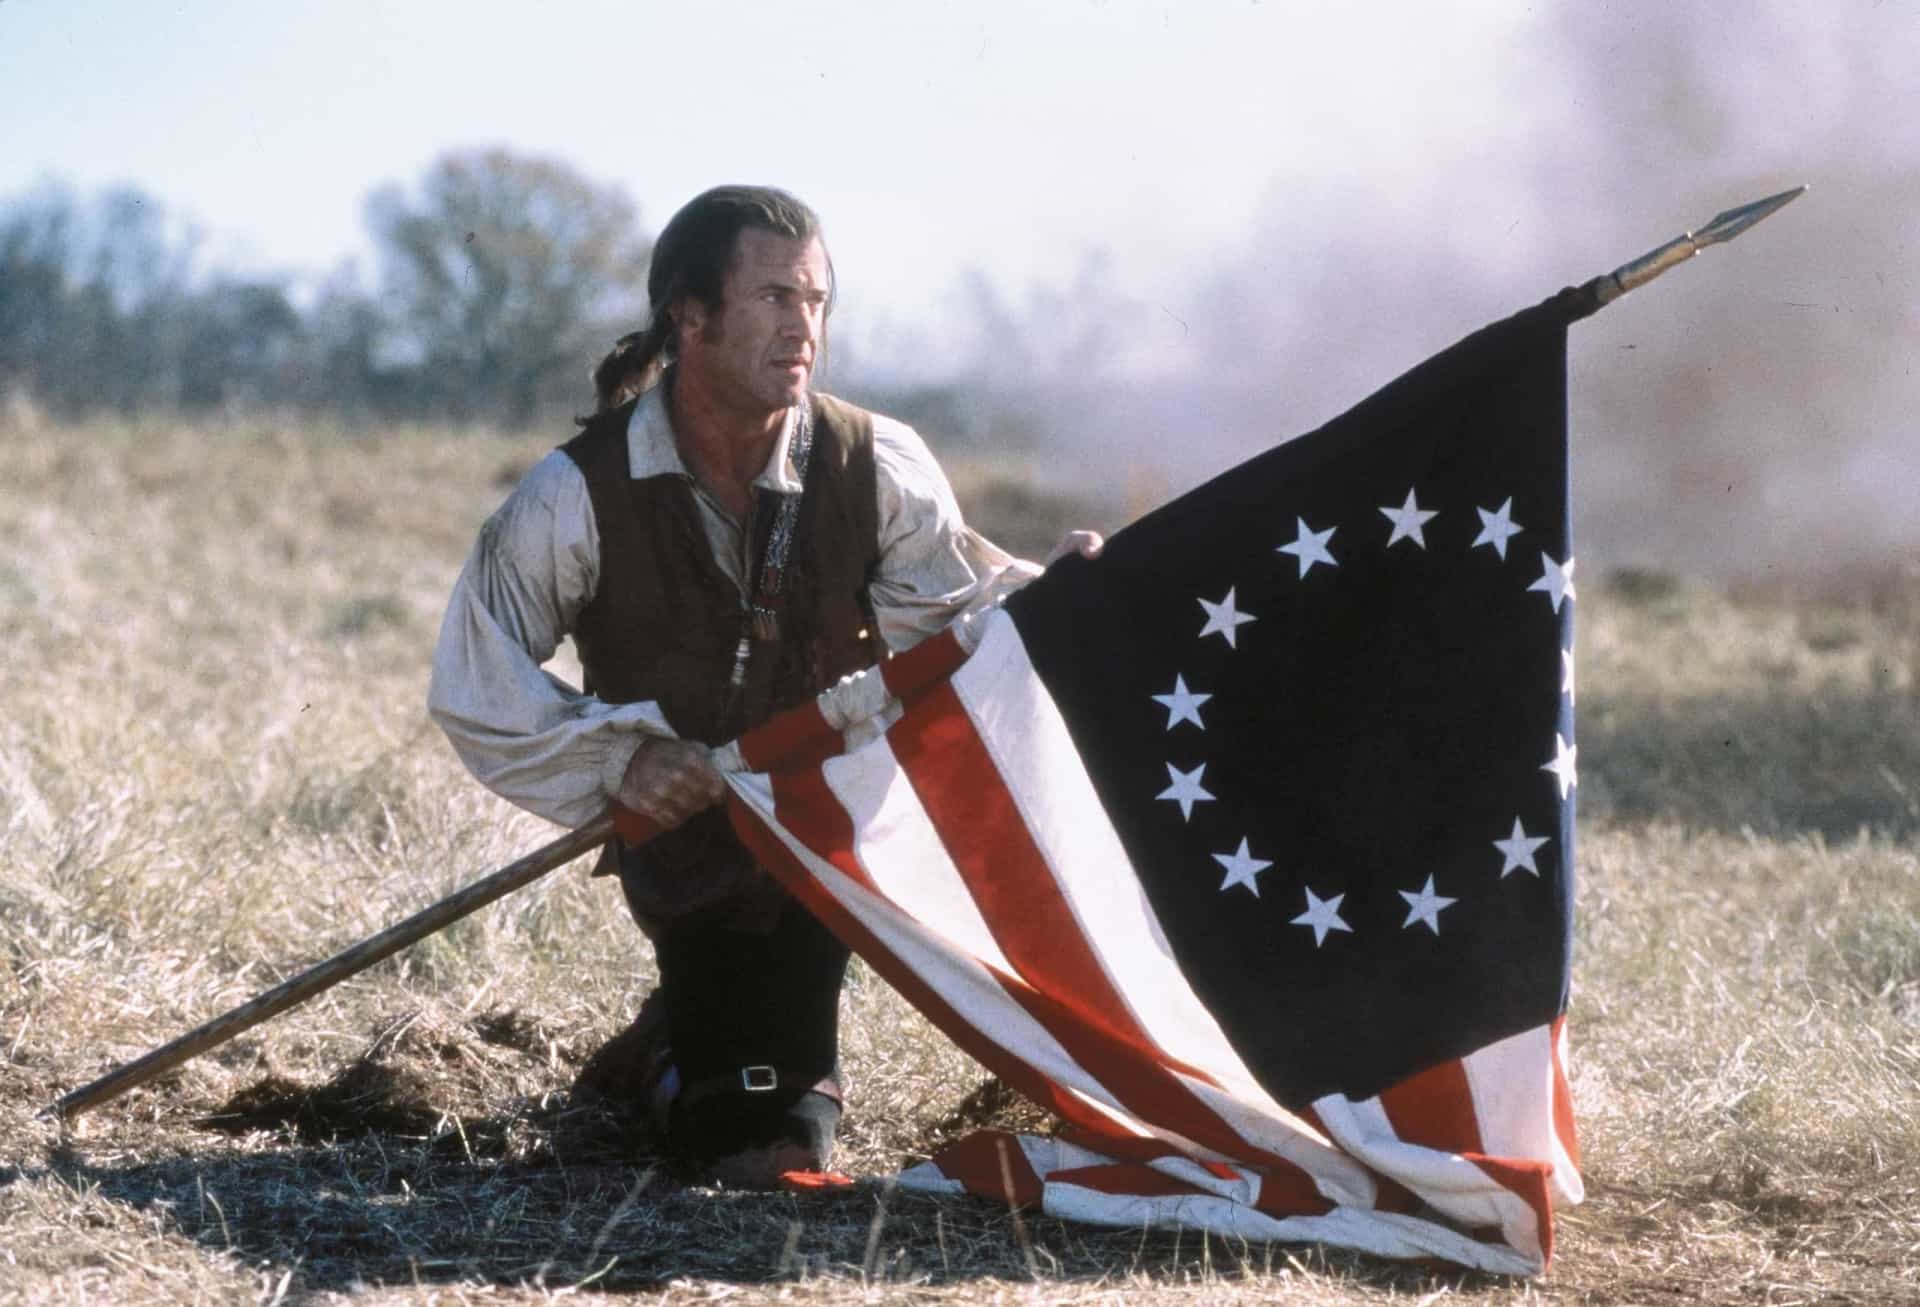 <p>As for the 2000 film with the same title, it's about war veteran Benjamin Martin (Mel Gibson), who  joins in the American Revolutionary War after his son is killed.</p><p>You may also like:<a href="https://www.starsinsider.com/n/367581?utm_source=msn.com&utm_medium=display&utm_campaign=referral_description&utm_content=519875en-us"> How to save money around the house during summer</a></p>